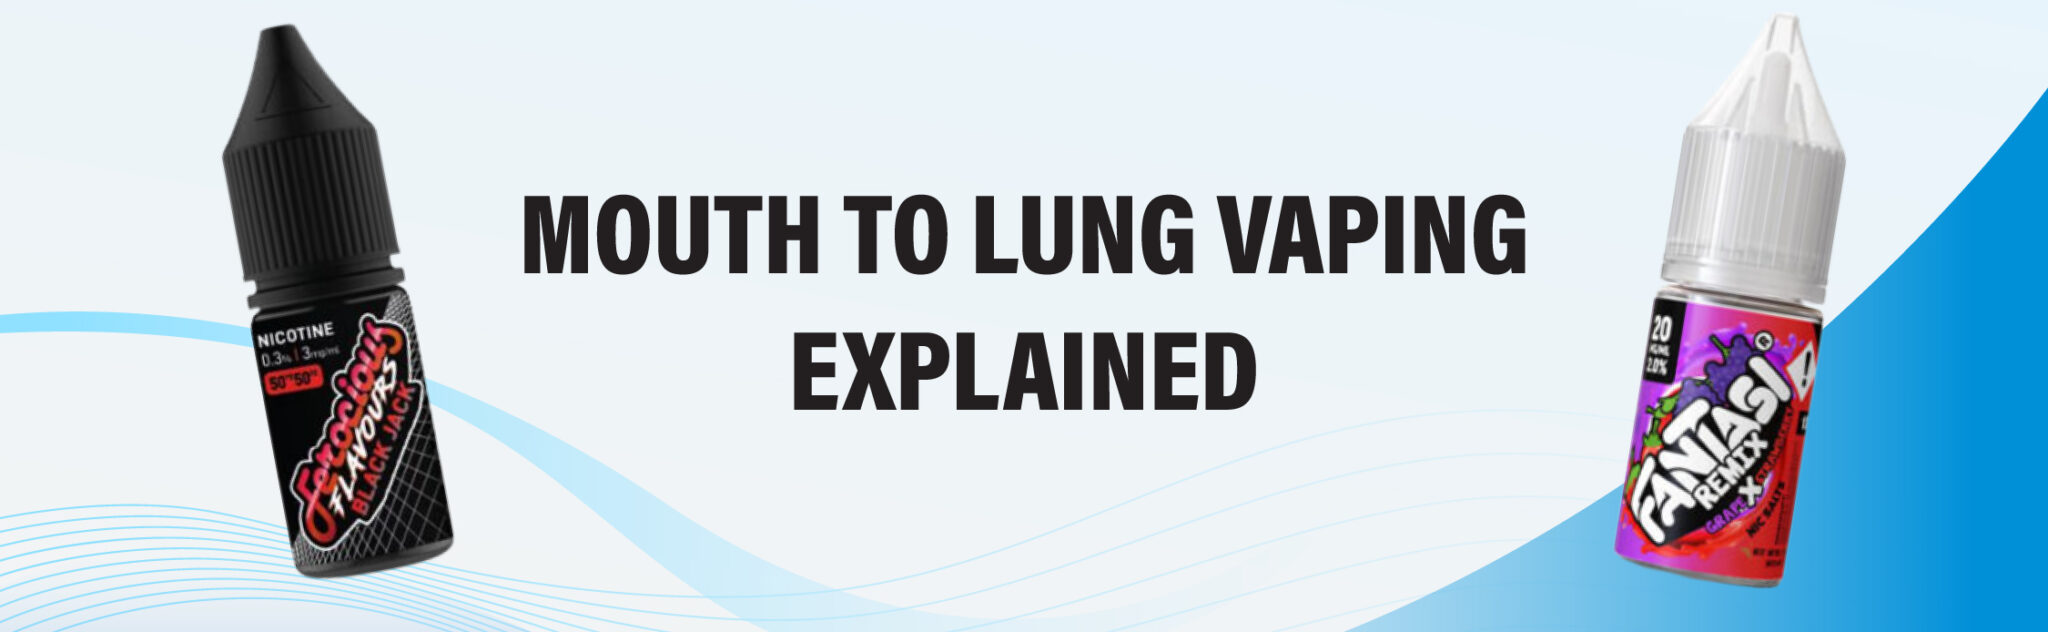 what is mouth to lung vaping -- explained